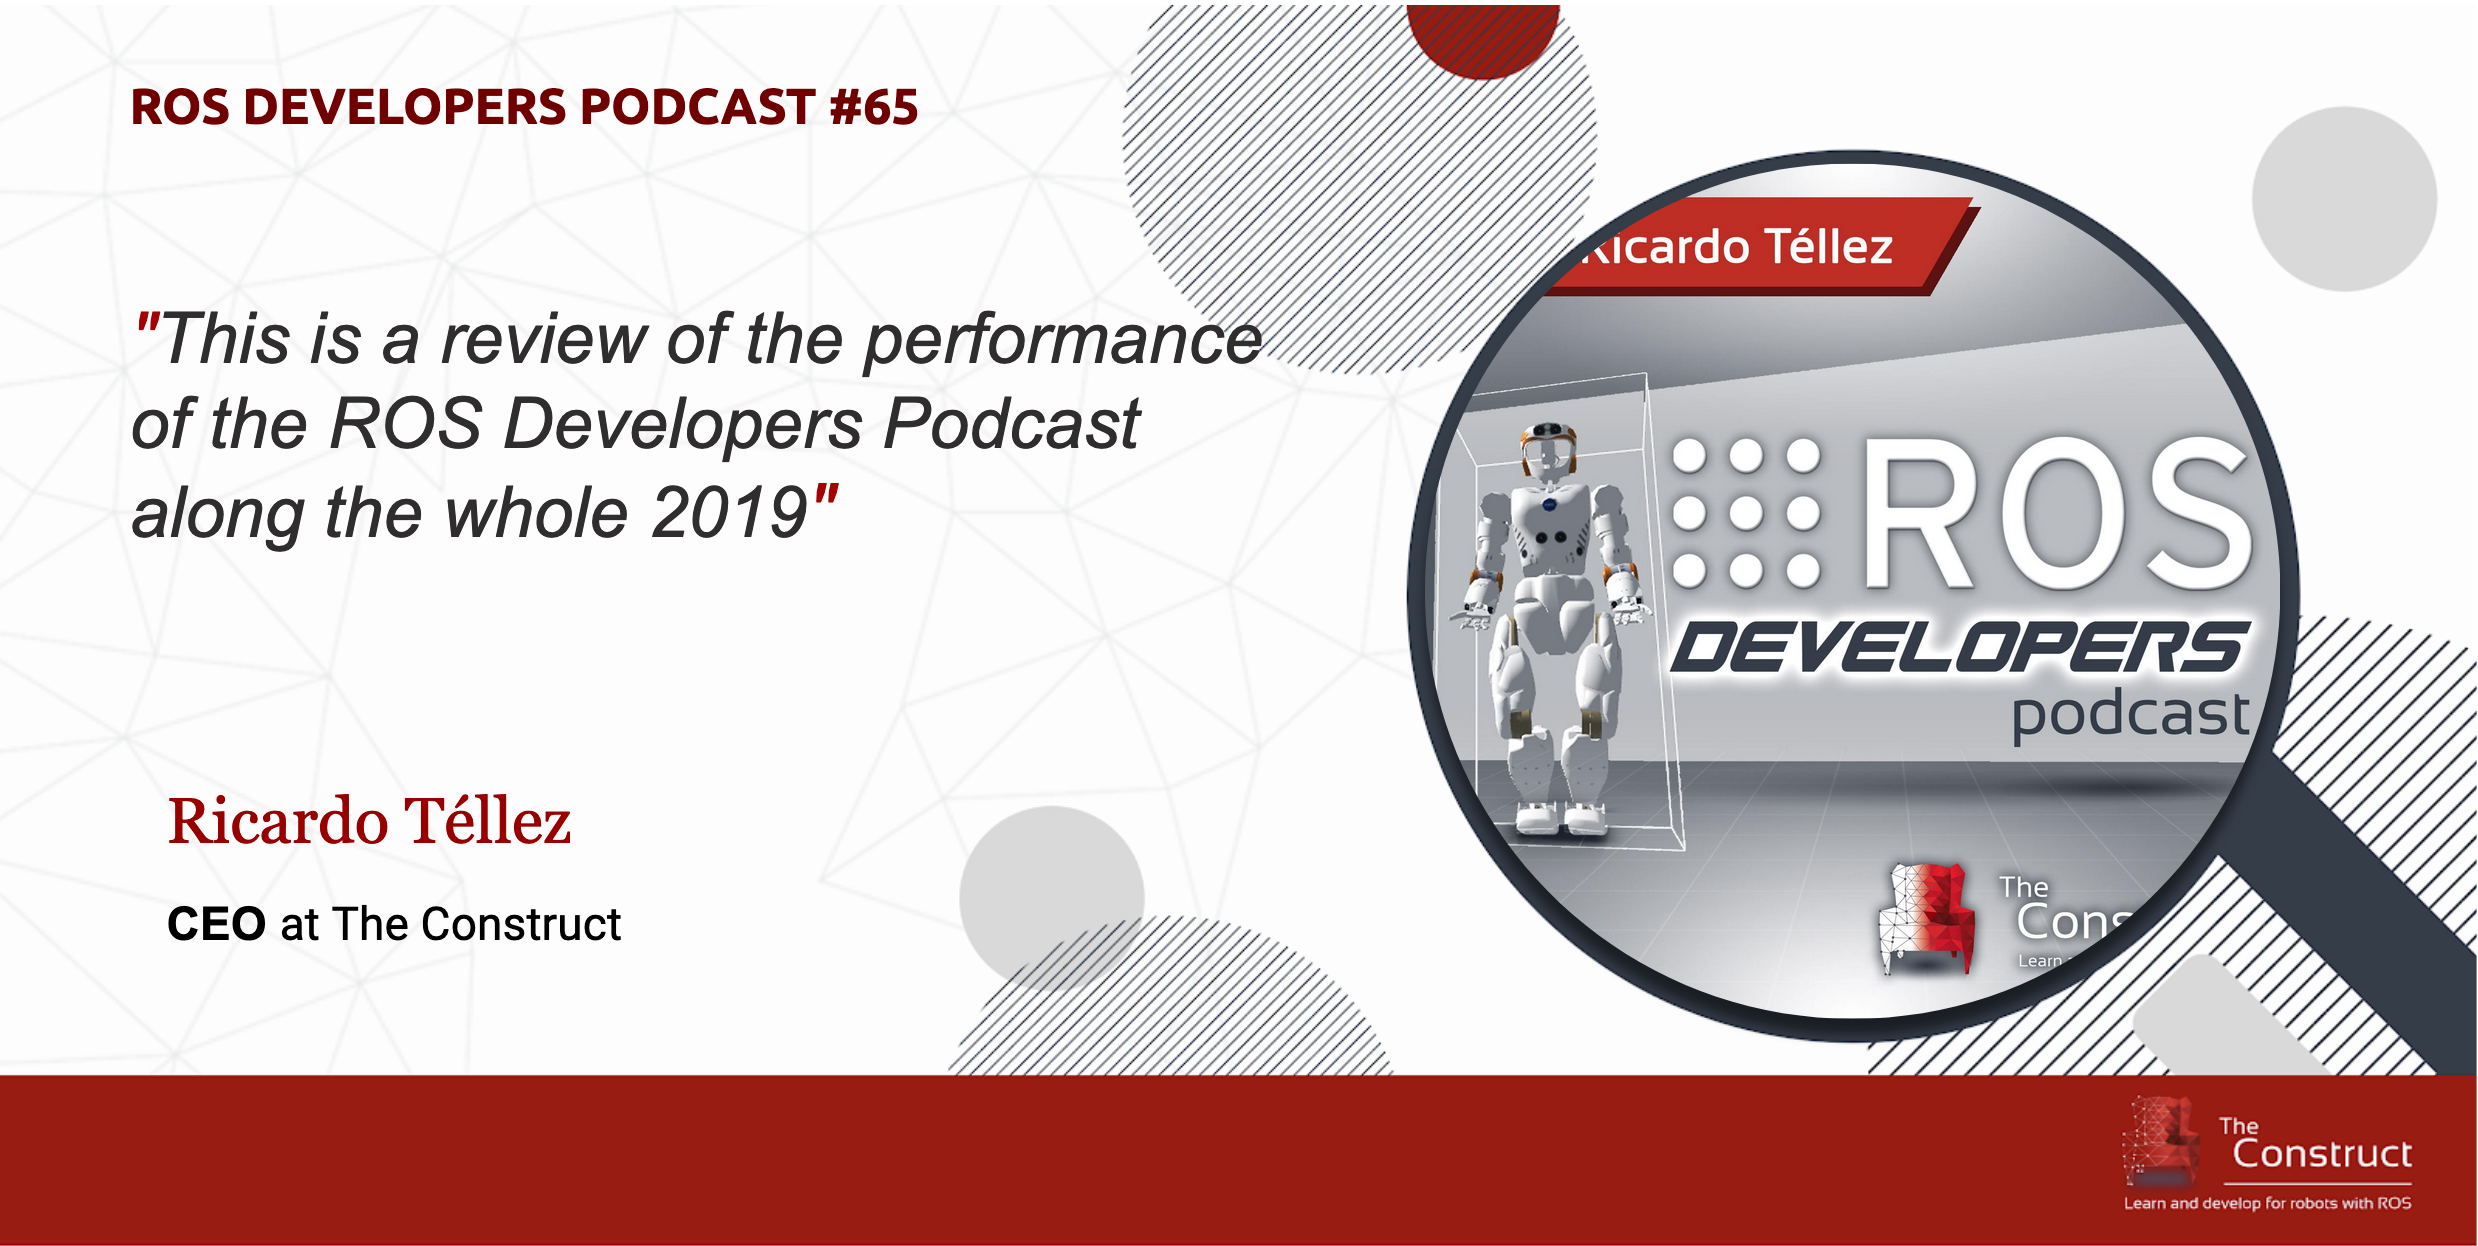 The ROS Developers Podcast 2019 Yearly Review